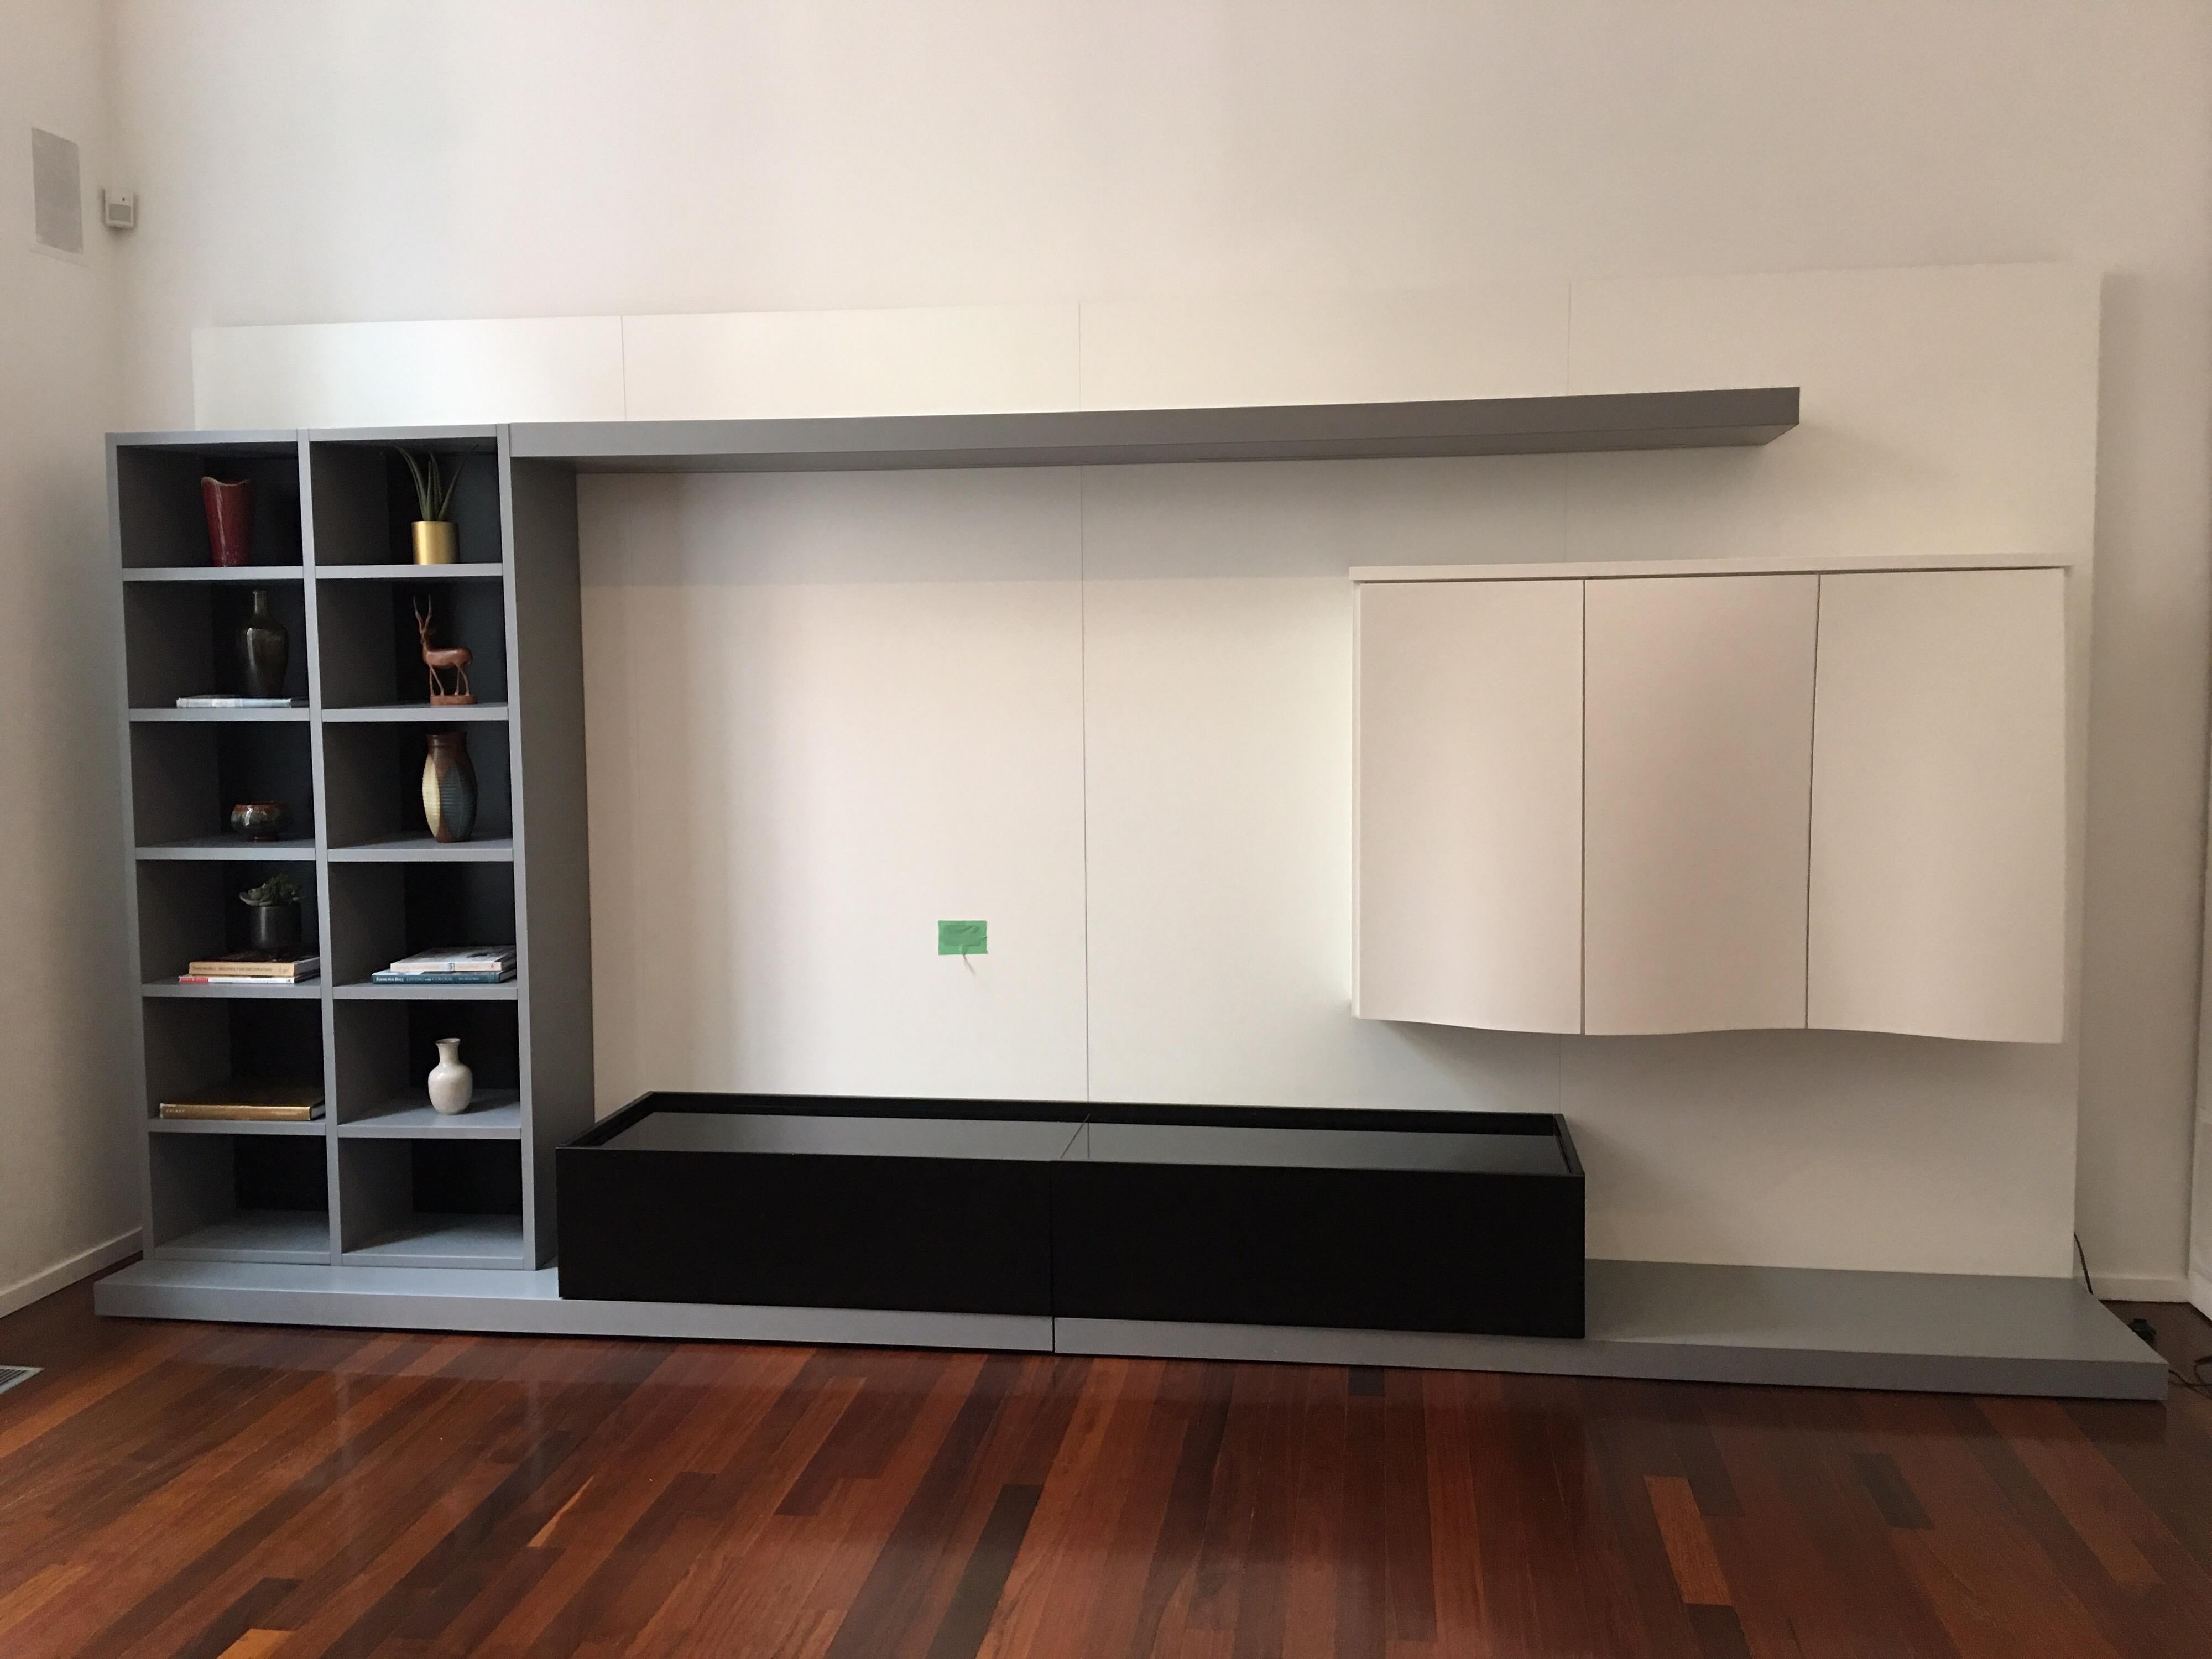 Roche Bobois media center/ wall unit with cabinets for storage and shelving. Handsome unit with plenty of storage options, and a great spot for that TV! Green box on wall is the cable box.